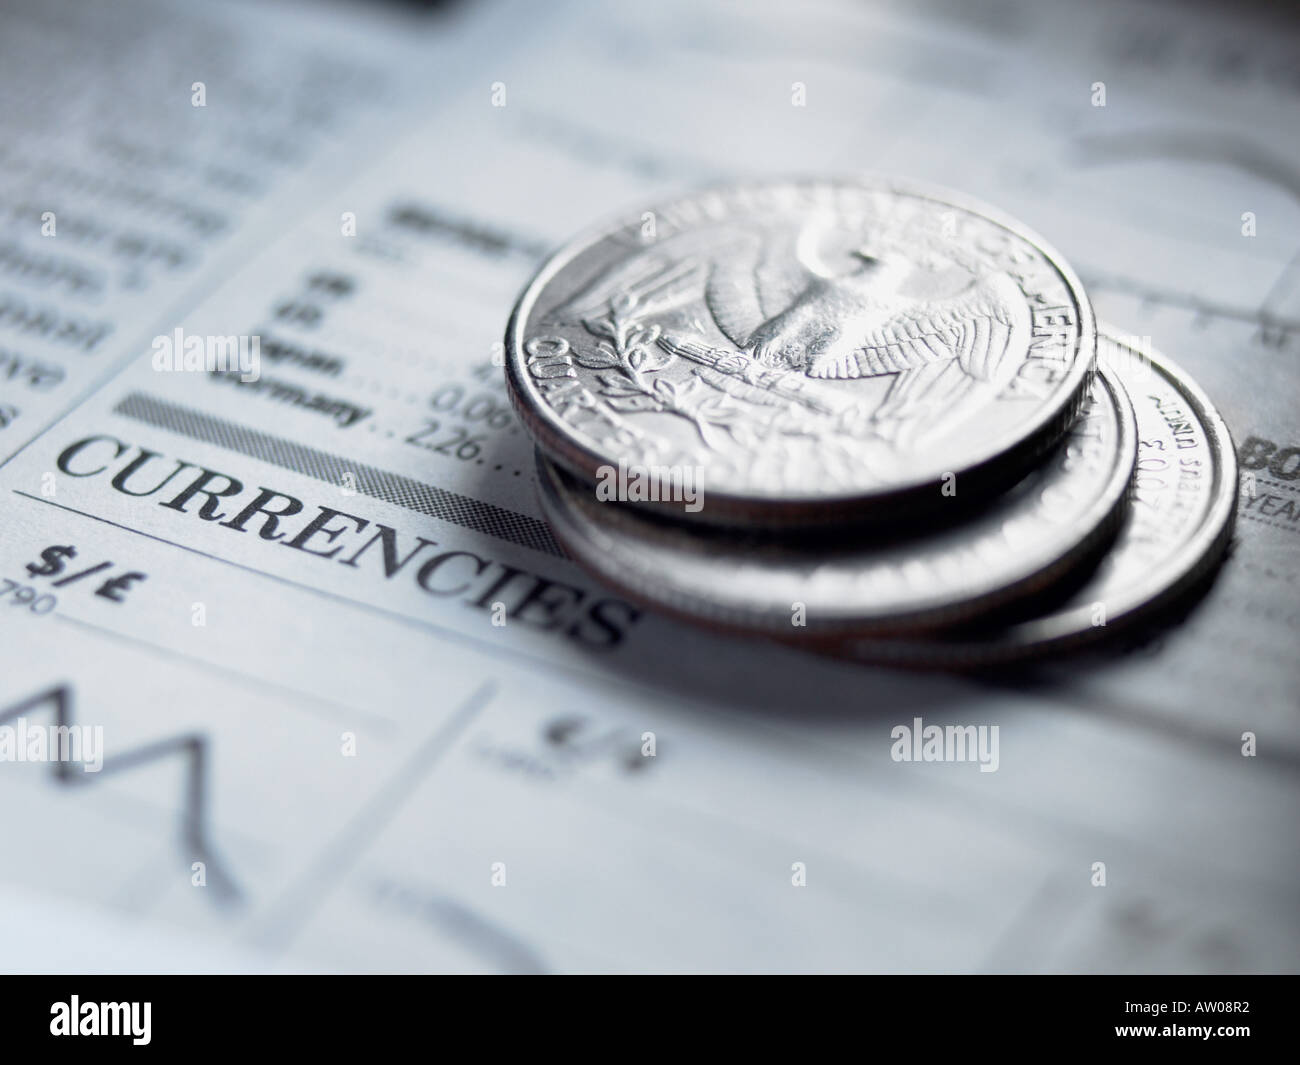 Quarters on a newspaper Stock Photo